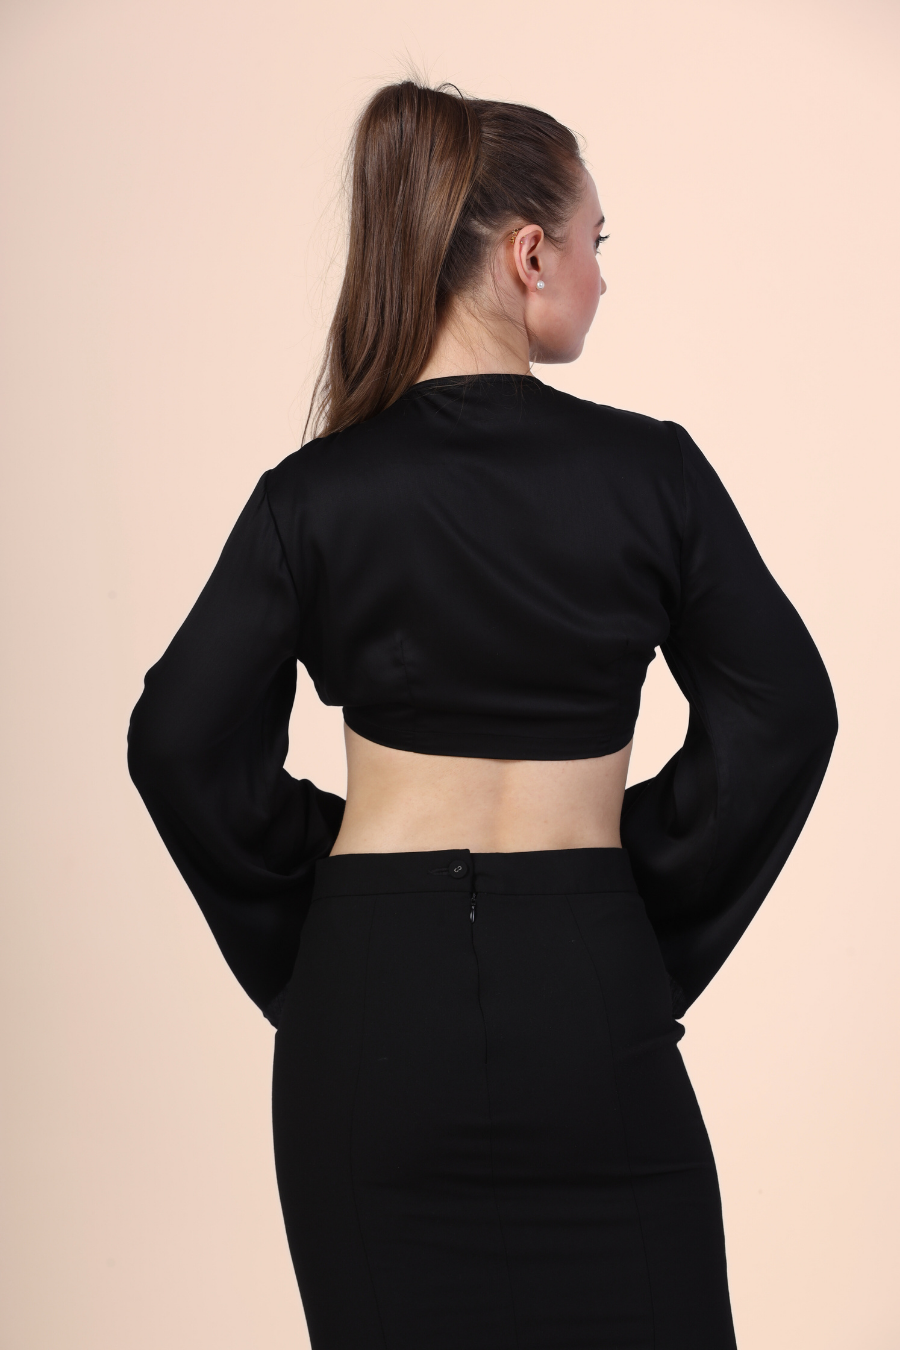 Back Pose Image of a model wearing a tie front crop top sewed with winslet's patterns paired with black midi skirt